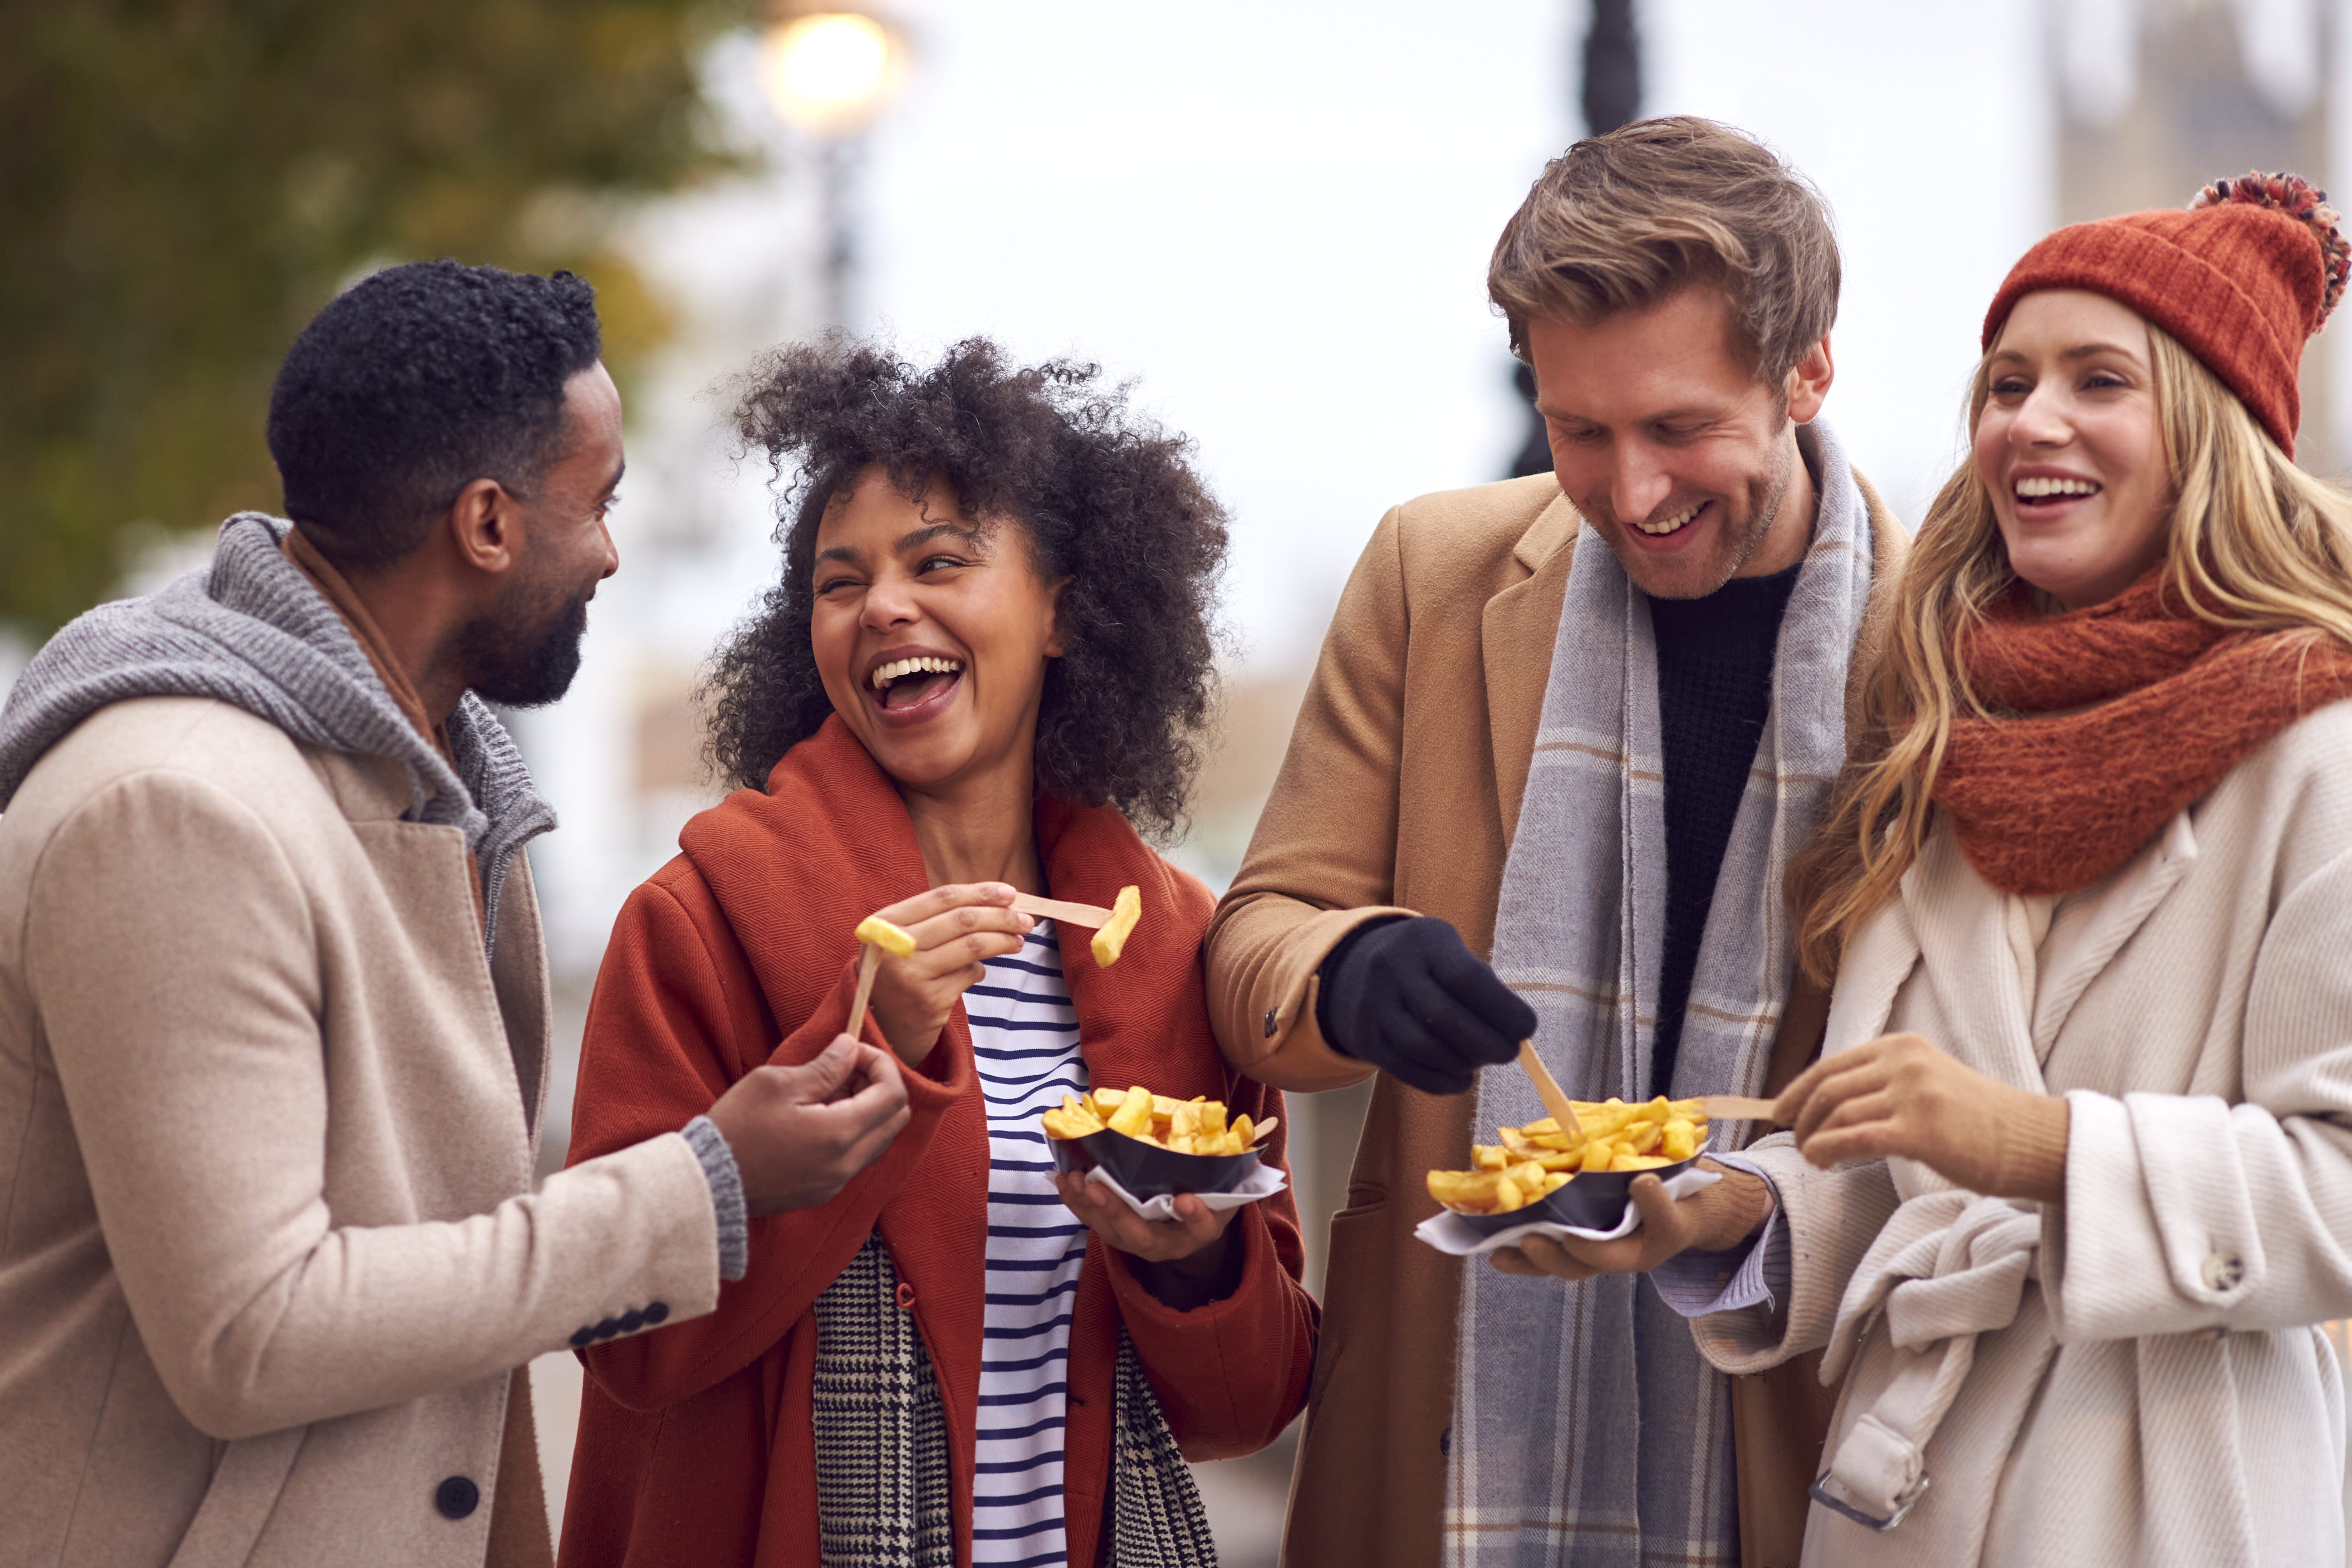 Group Of Friends Outdoors Wearing Coats And Scarves Eating Takeaway Fries In Autumn London